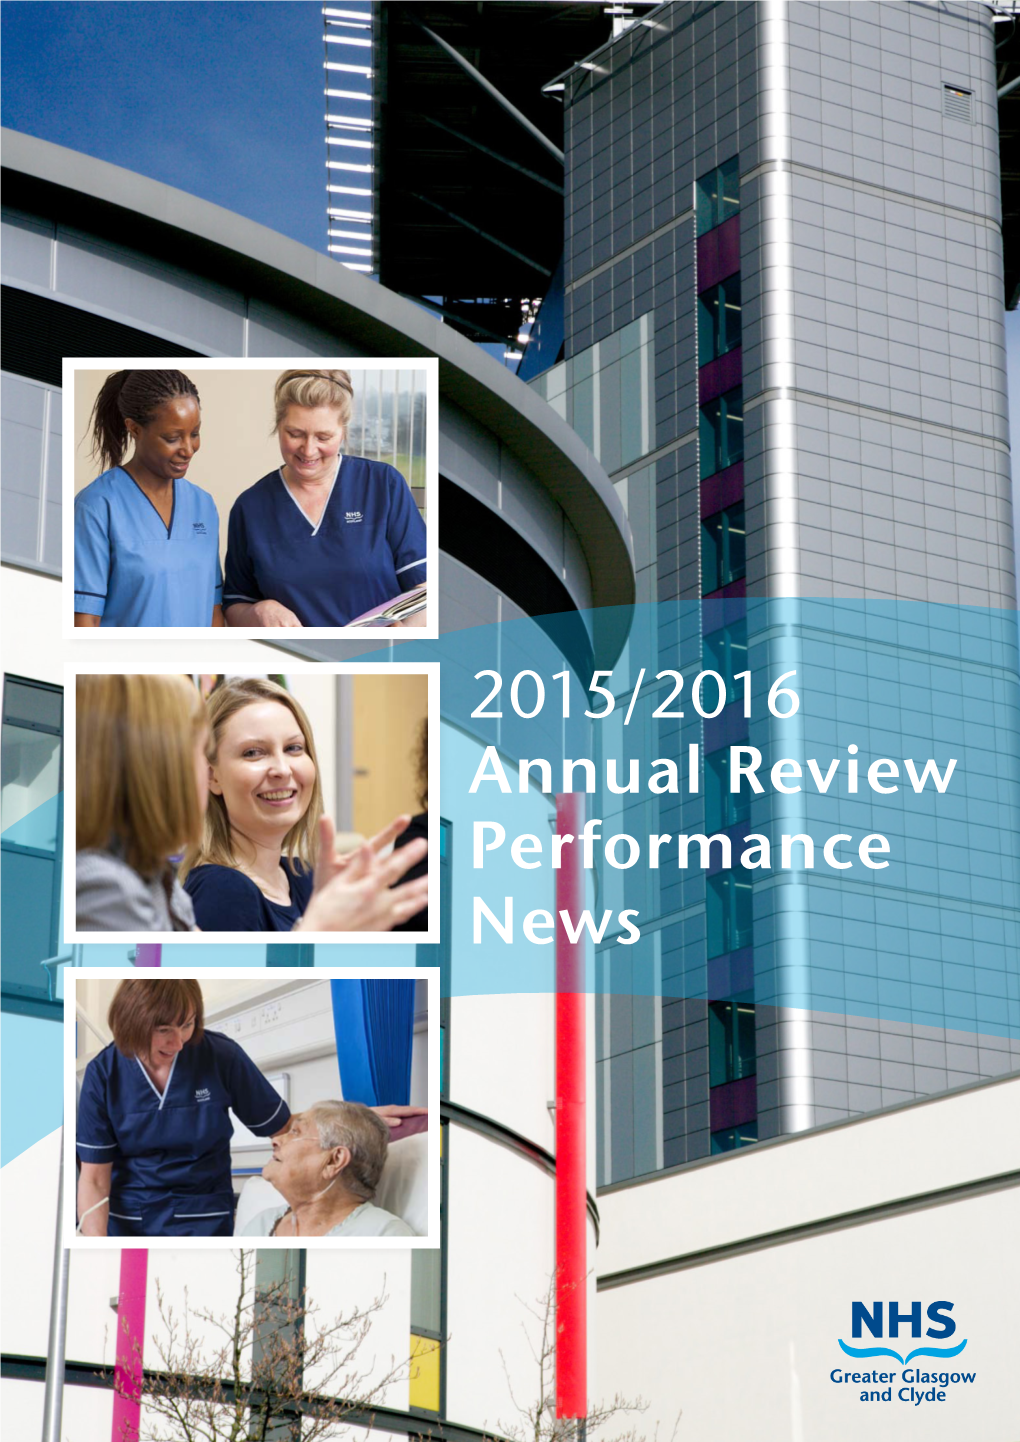 2015/2016 Annual Review Performance News